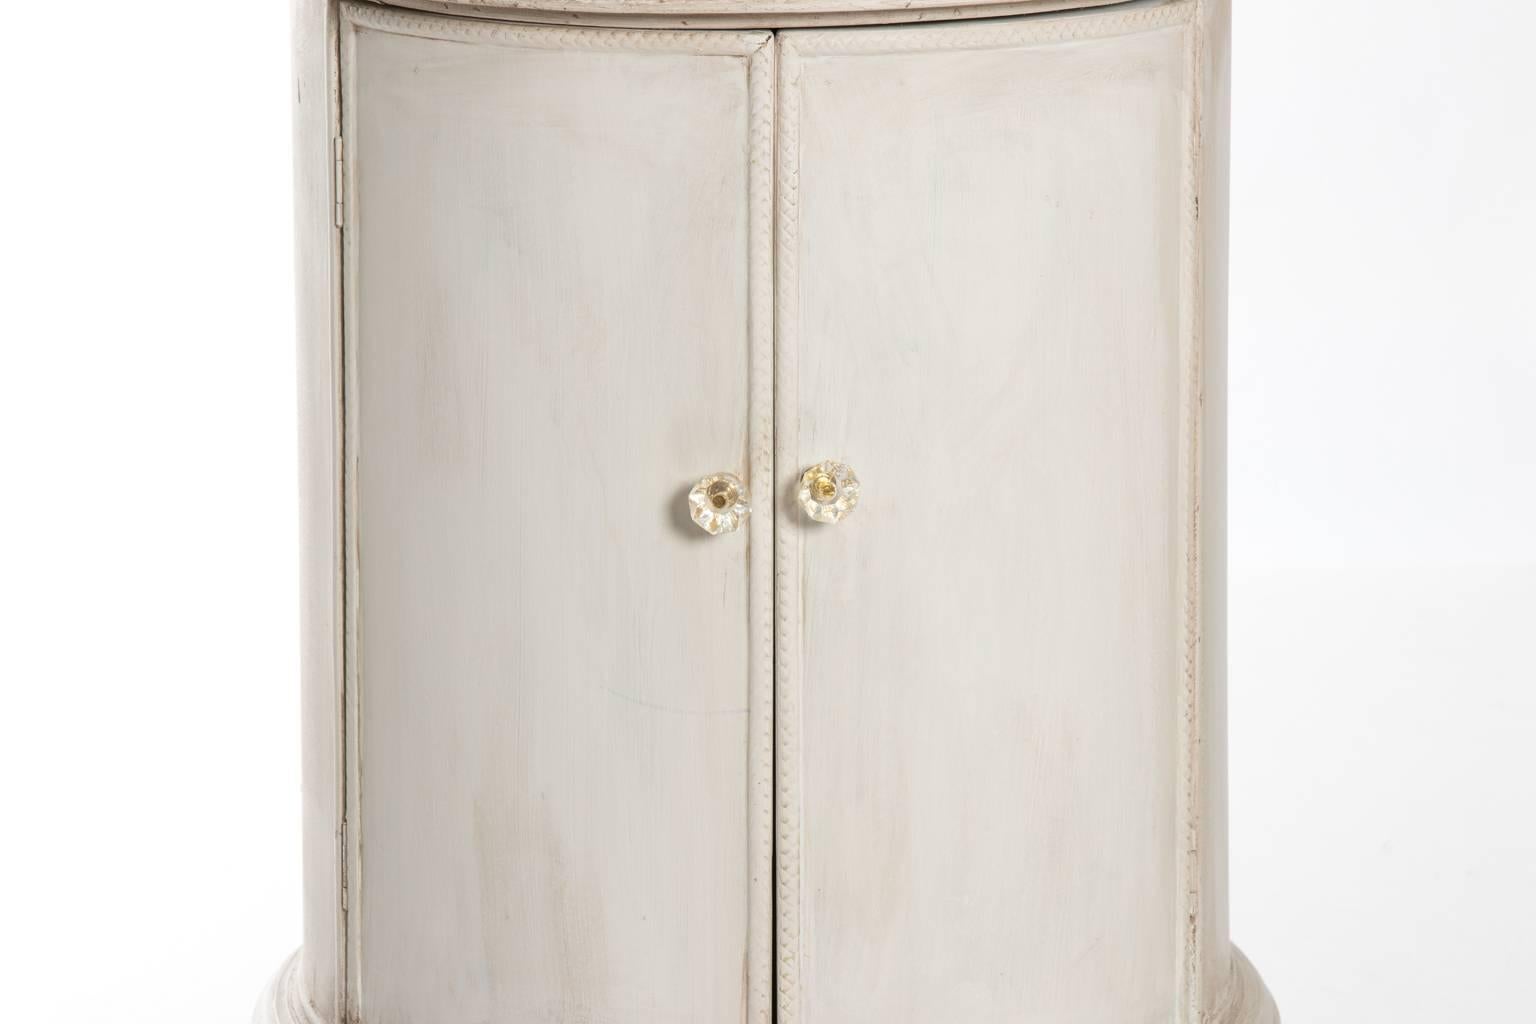 1970s painted round stand with two doors.
 